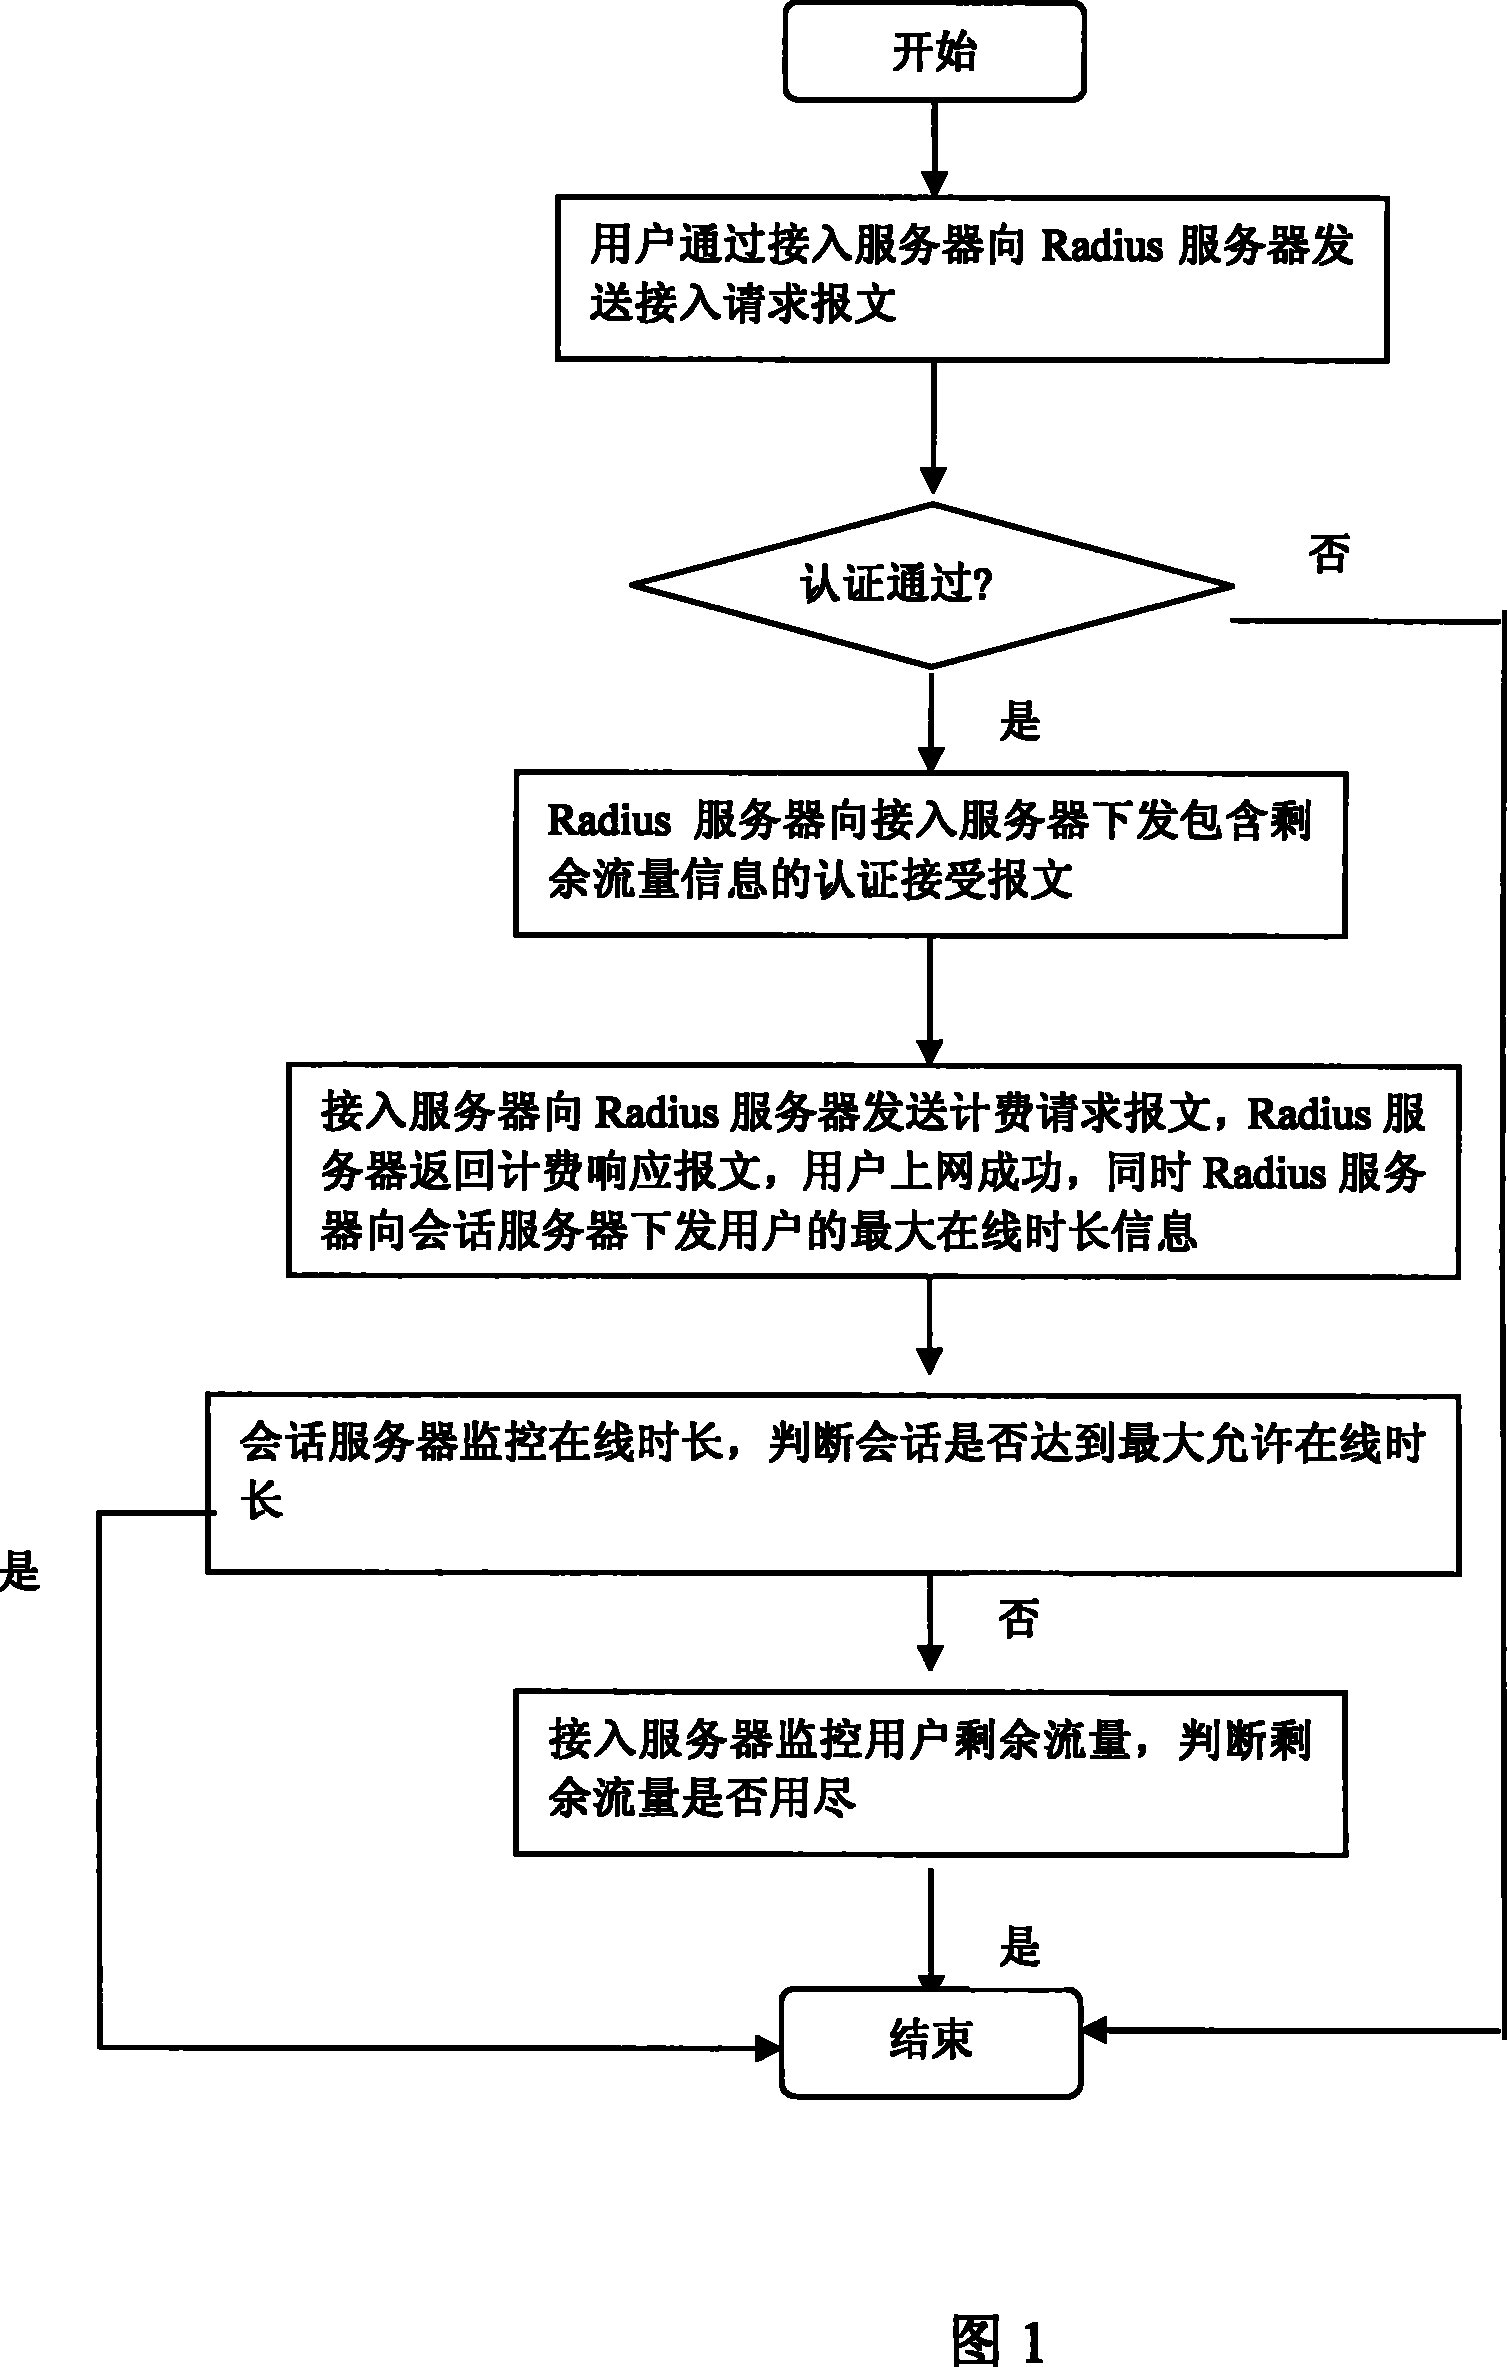 AAA service session access control system and method